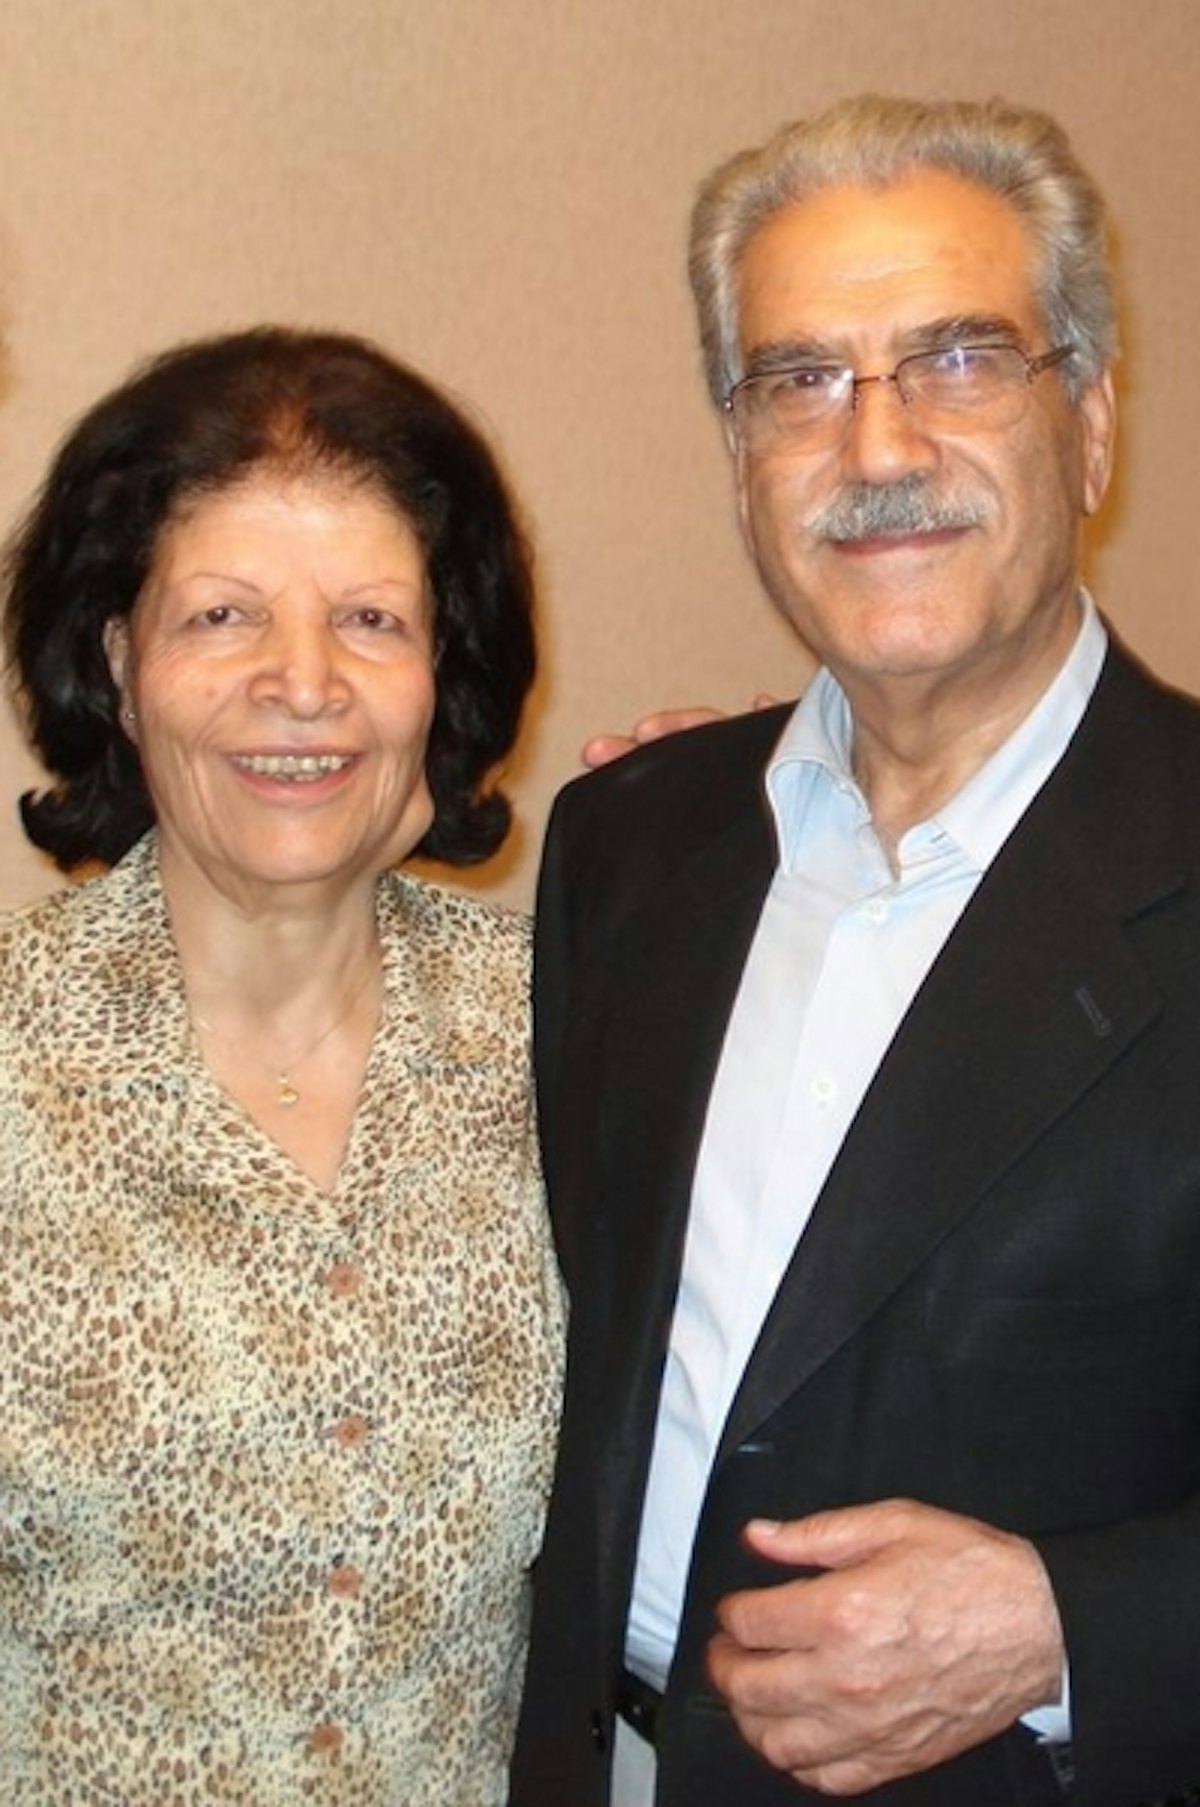 Mrs. Ashraf Khanjani, pictured with her husband, Jamaloddin Khanjani. Mrs. Khanjani died on Thursday 10 March at the age of 81. The couple were married for more than 50 years.